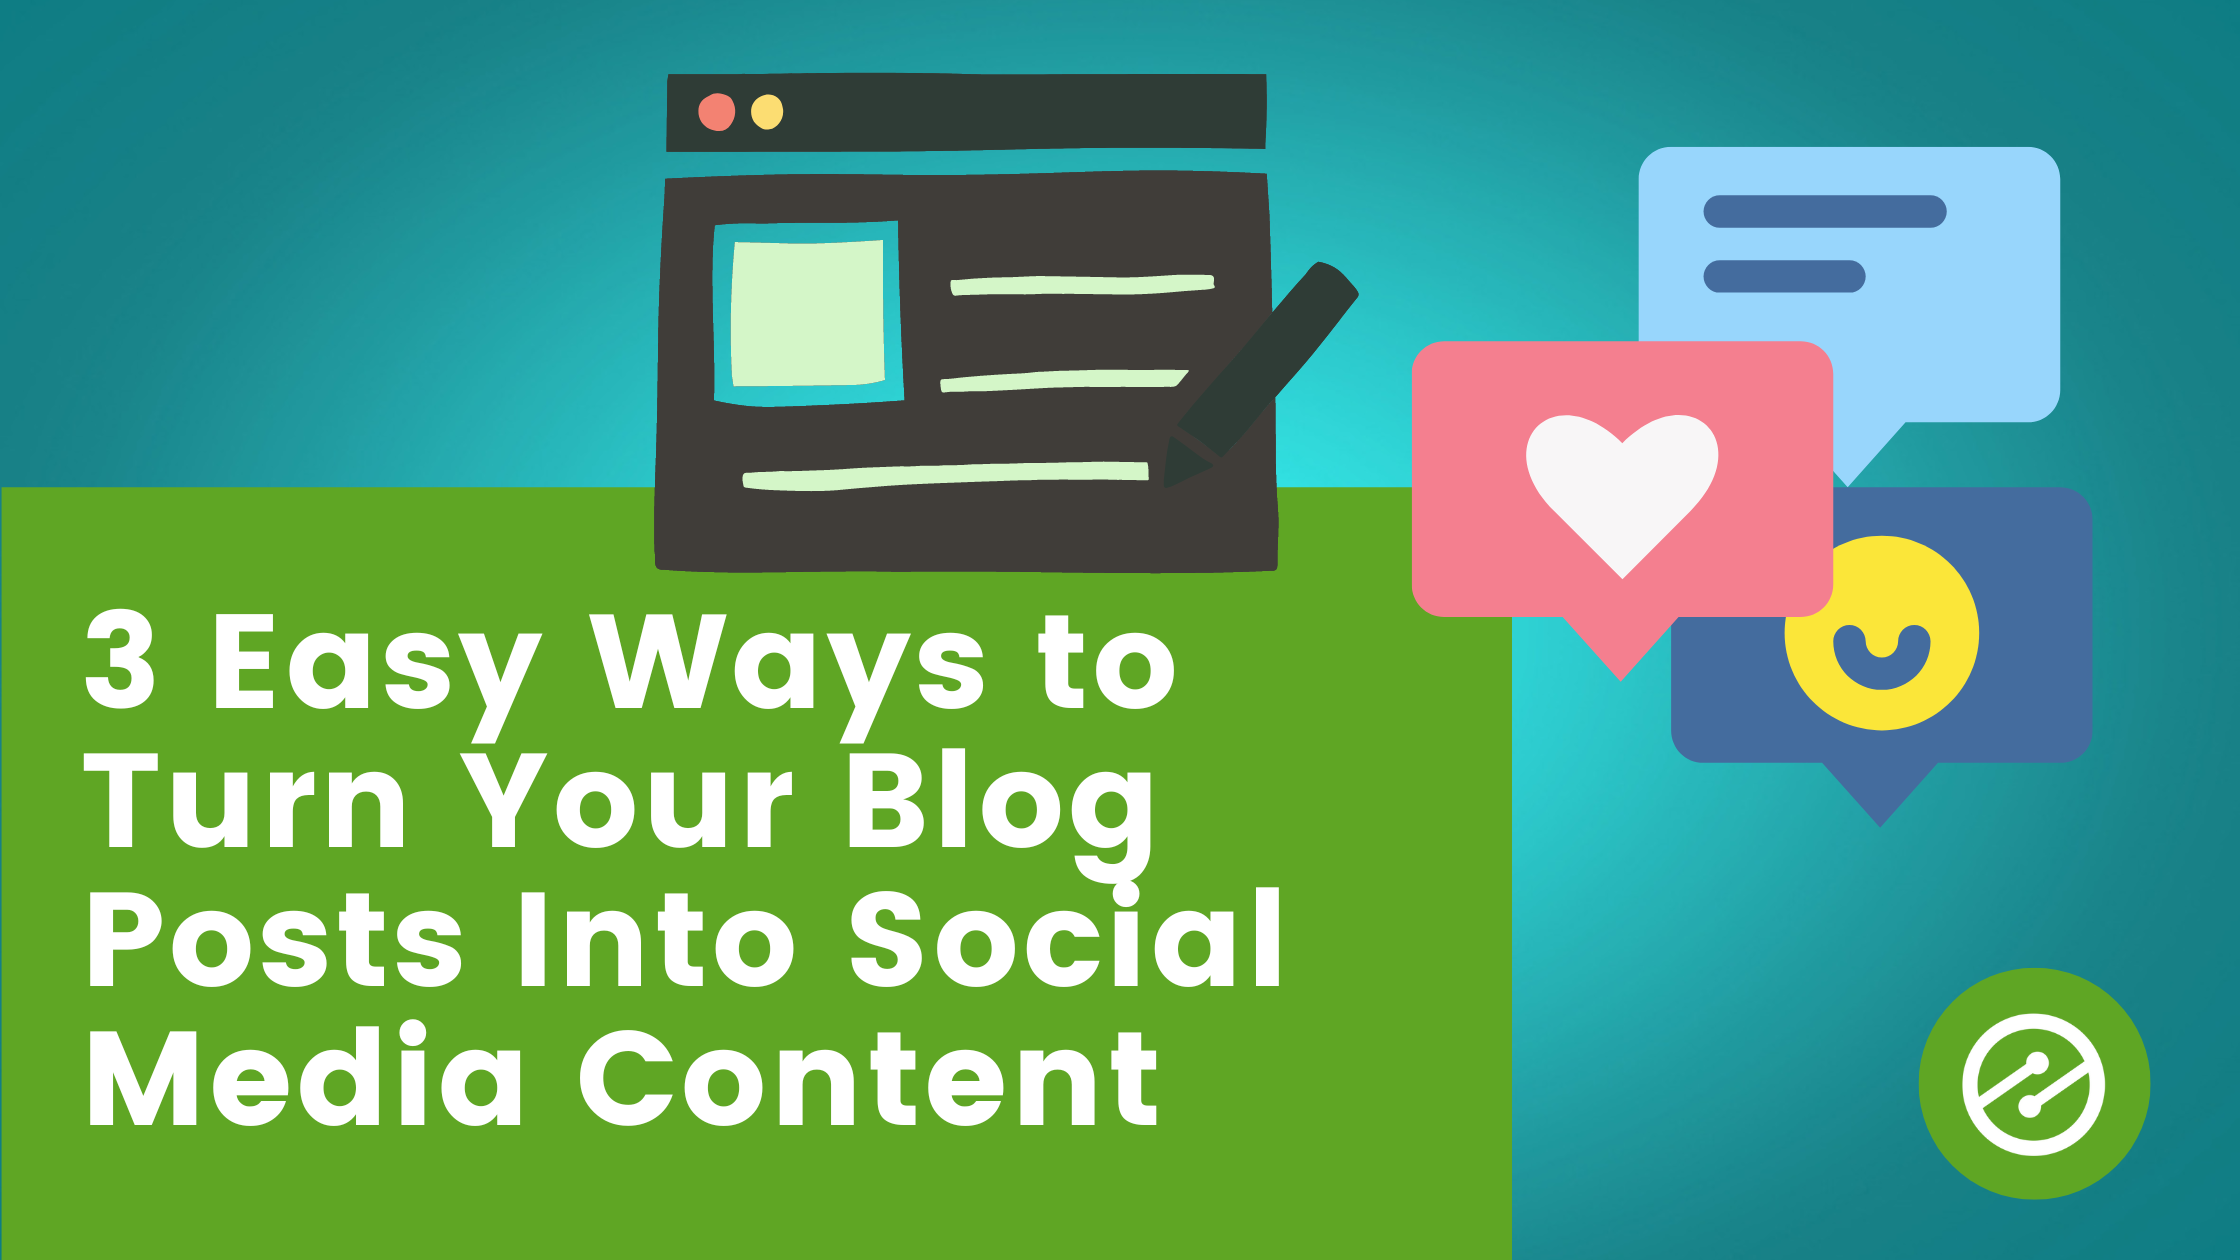 3 Easy Ways To Turn Your Blog Posts Into Social Media Content